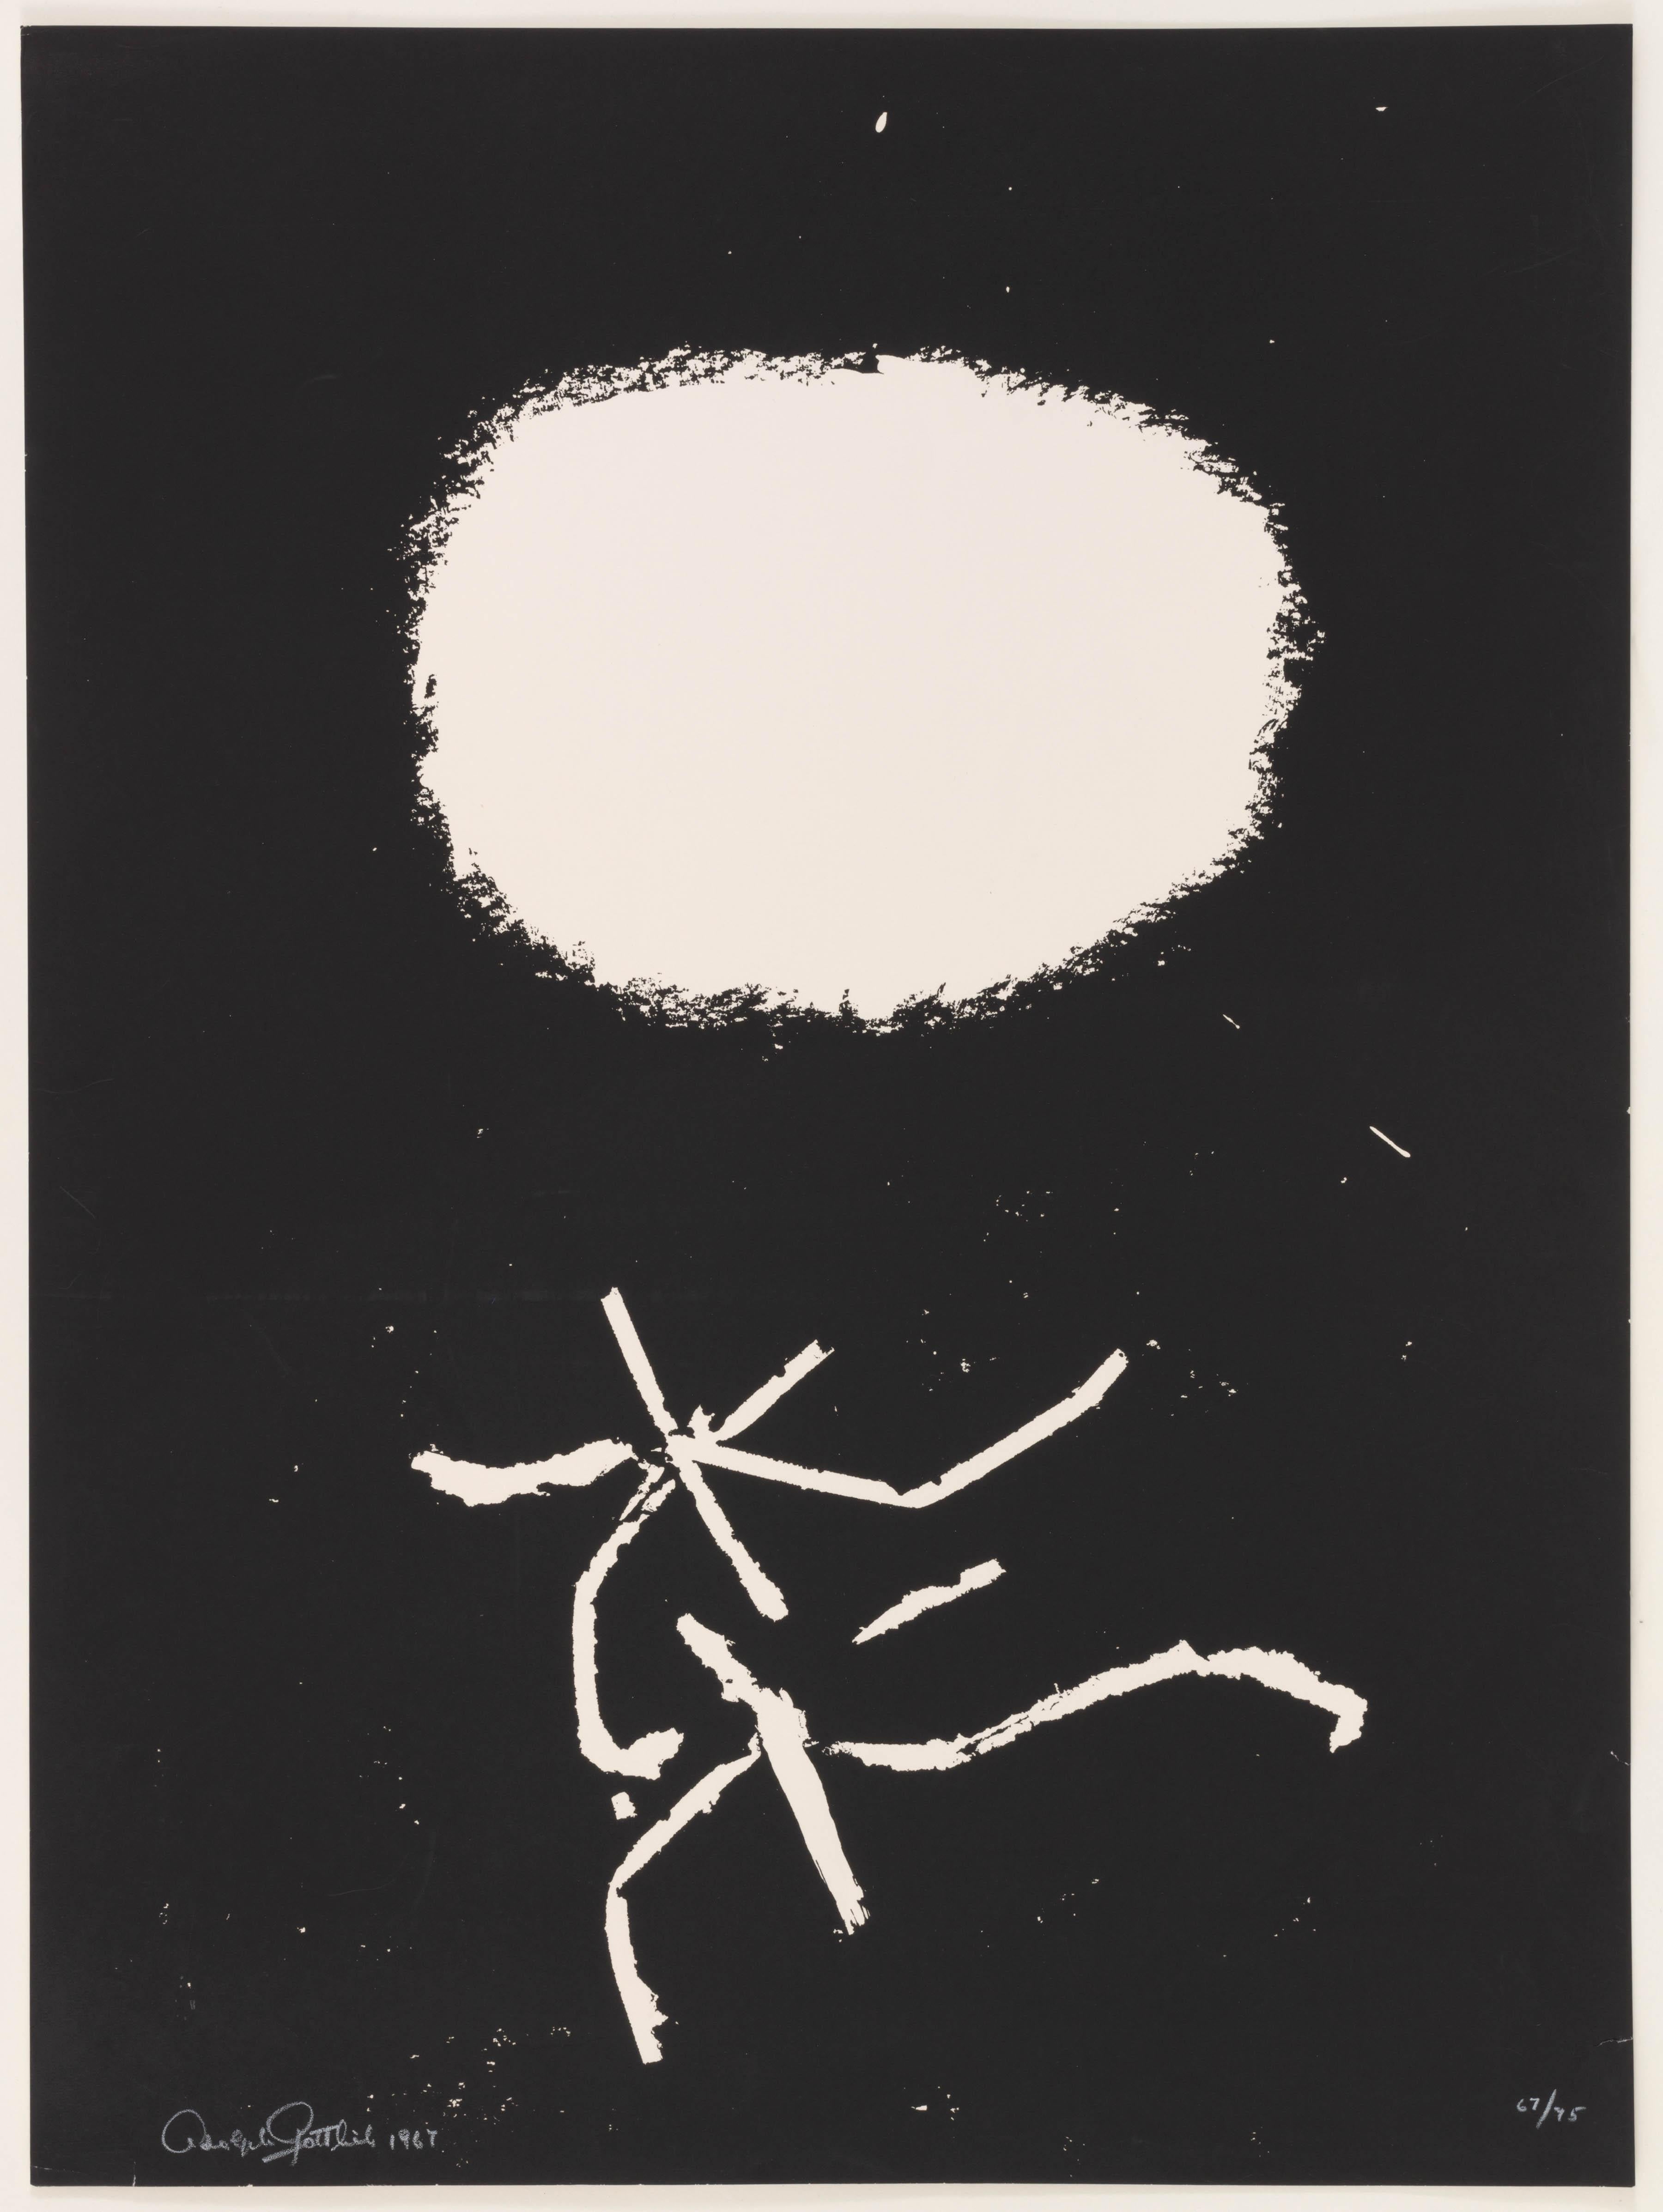 Flying Lines - Print by Adolph Gottlieb